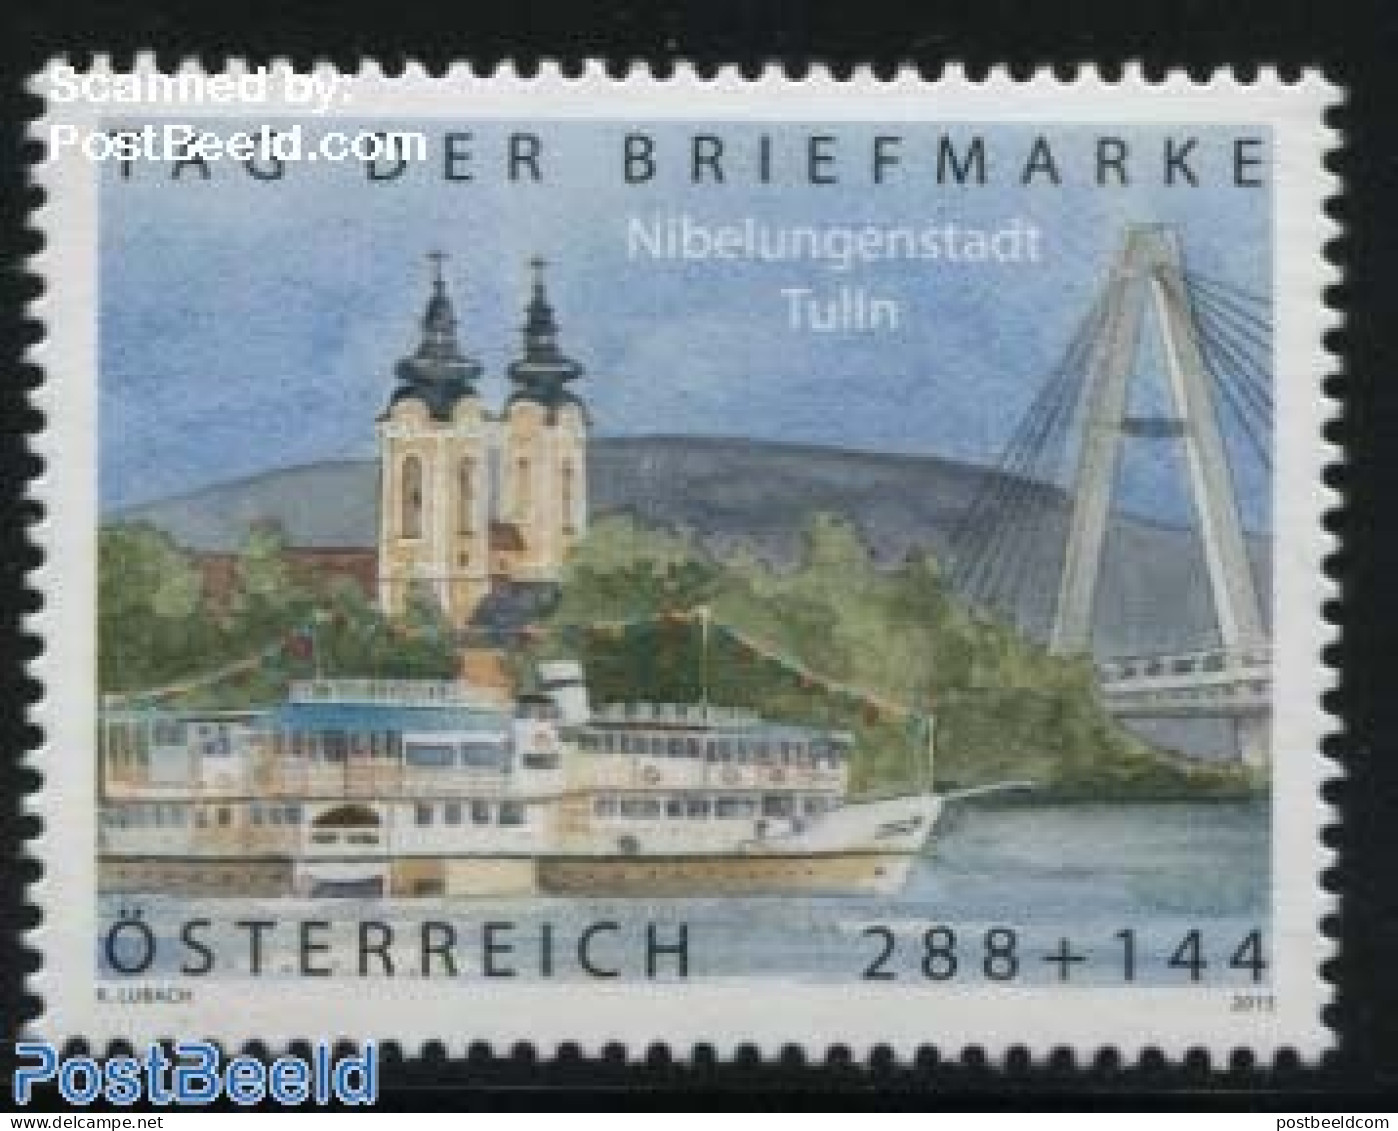 Austria 2015 Stamp Day 1v, Mint NH, Religion - Transport - Churches, Temples, Mosques, Synagogues - Stamp Day - Ships .. - Neufs